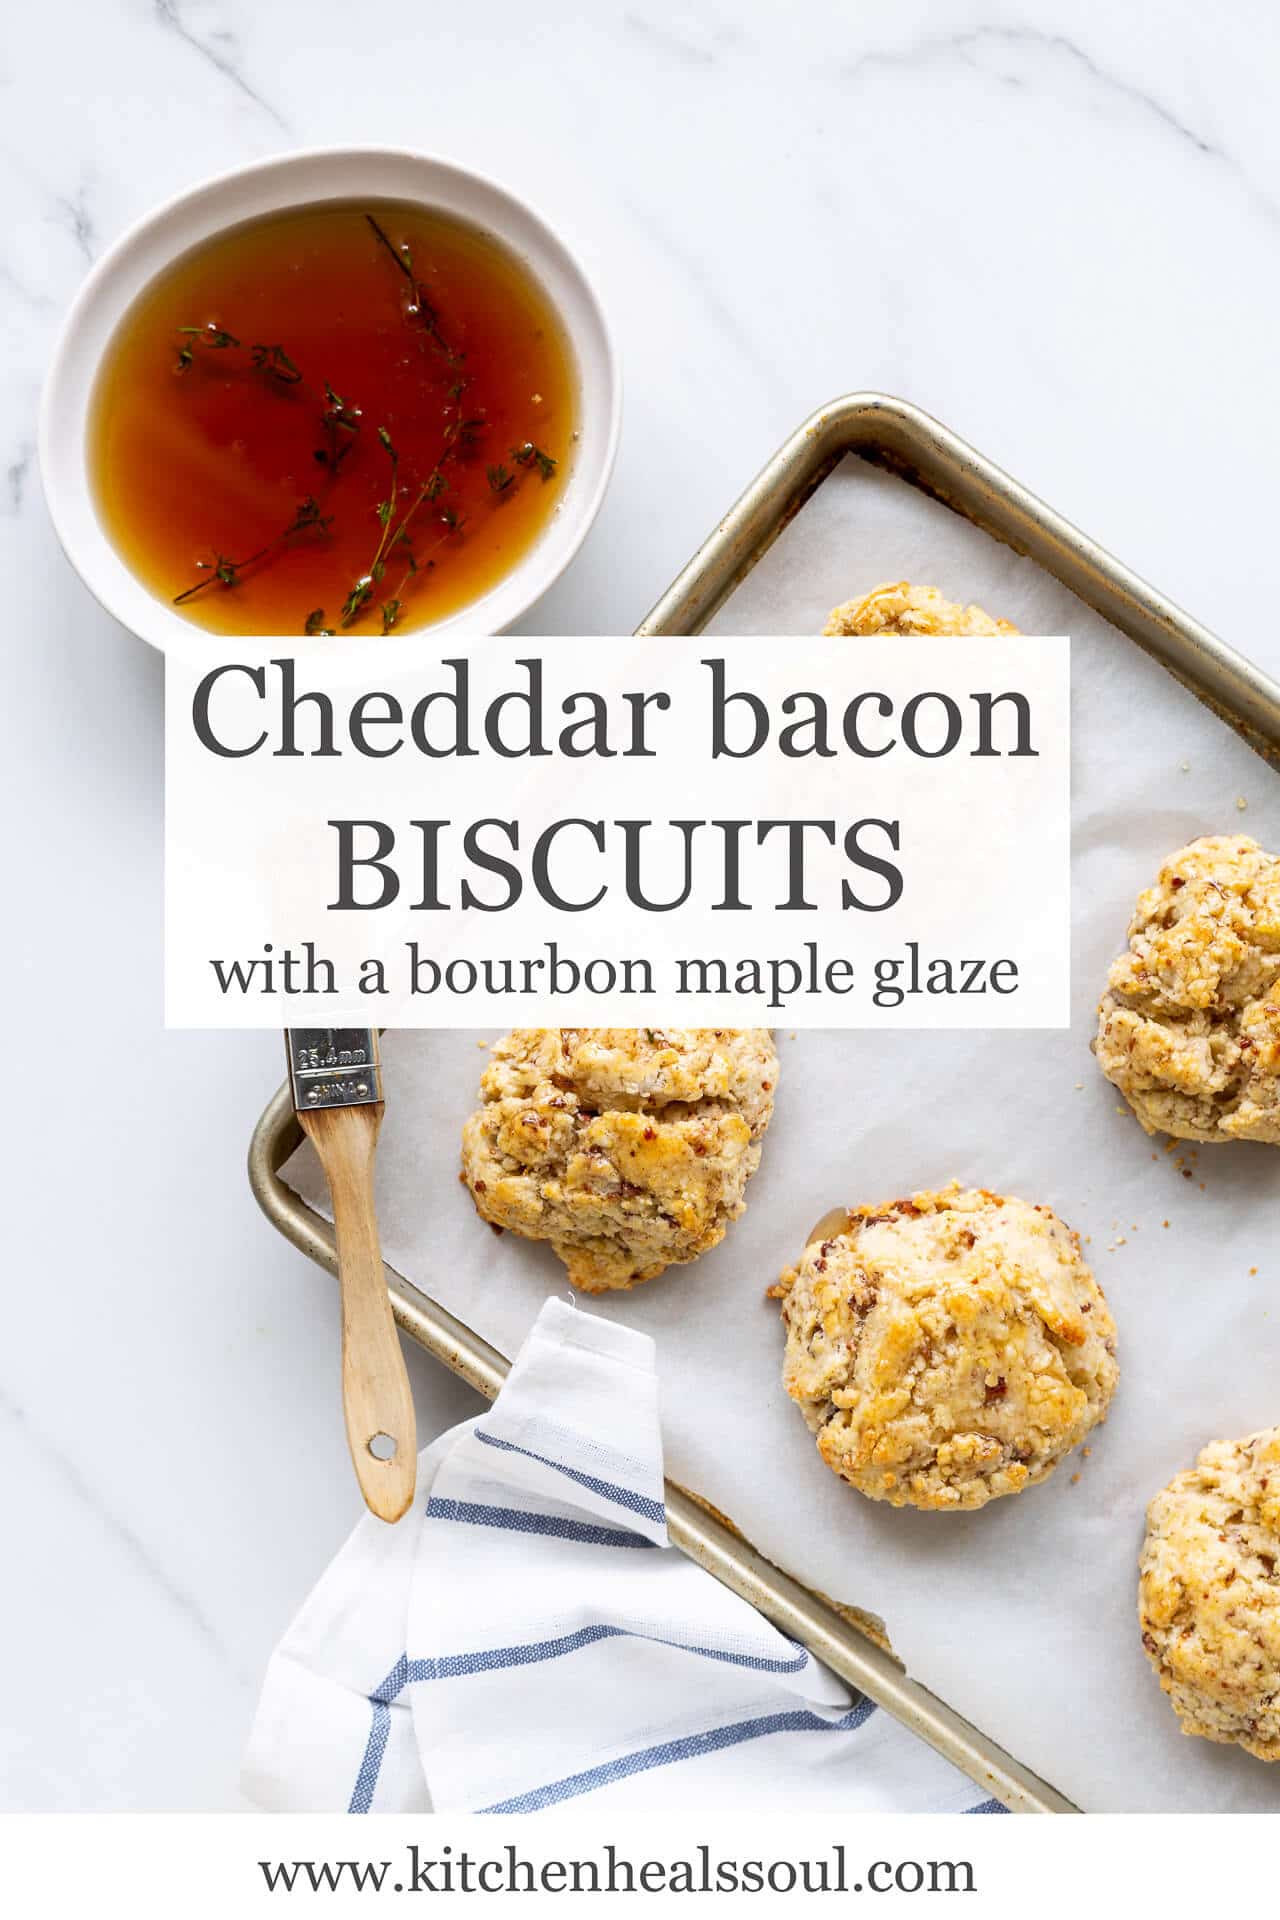 Bacon biscuits are brushed with a bourbon maple glaze infused with fresh thyme using a pastry brush as they cool on a parchment lined sheet pan with a white and blue striped towel